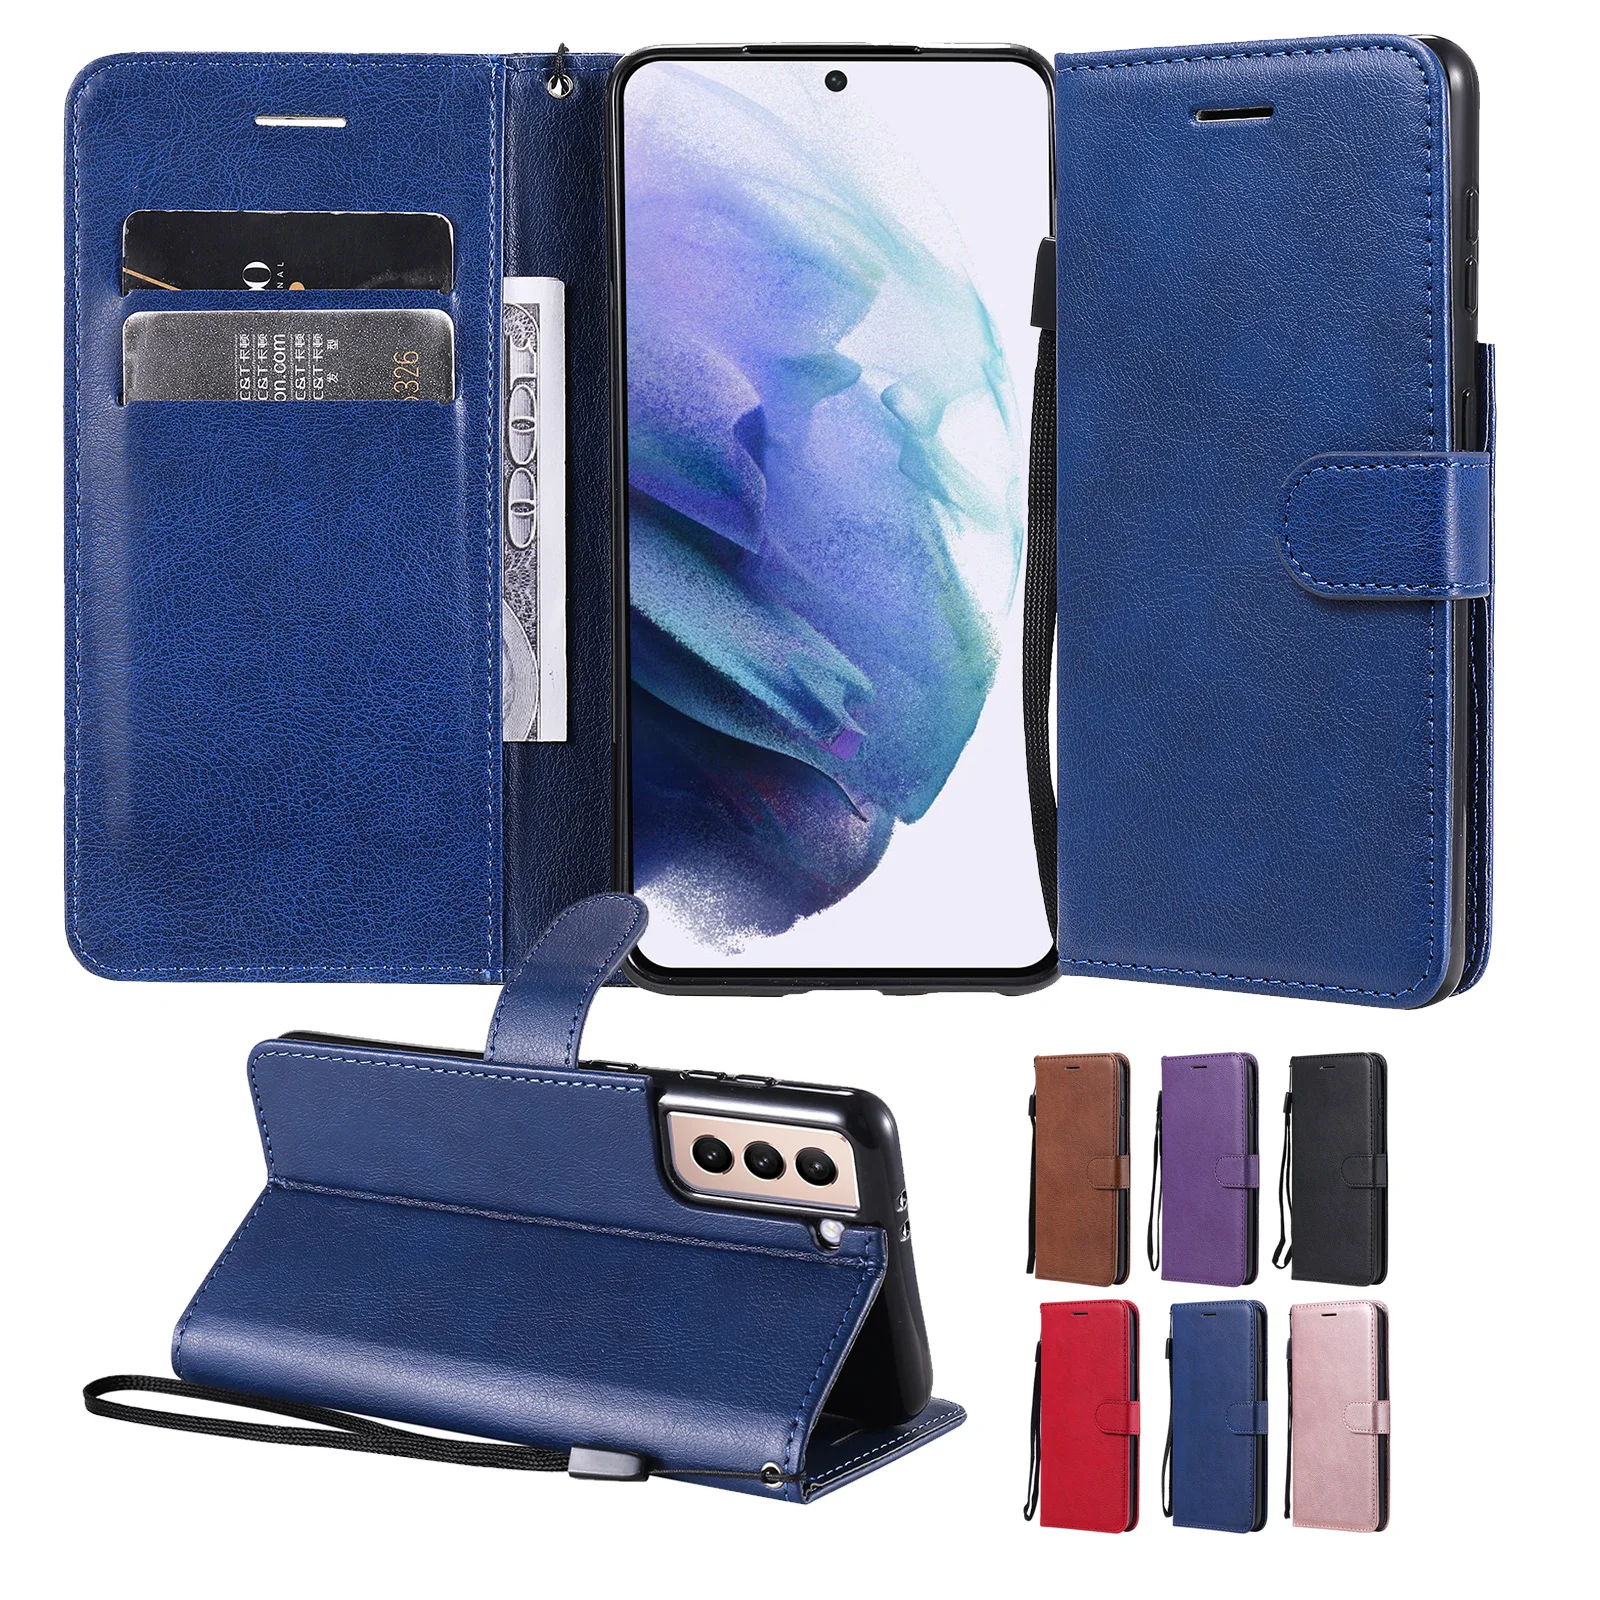 

Magnetic Folio Flip Wallet Cover For Samsung Galaxy J3 J310 J320 J330 J510 J530 J710 J730 J5 J7 Prime A310 A320 A510 A520 Cases